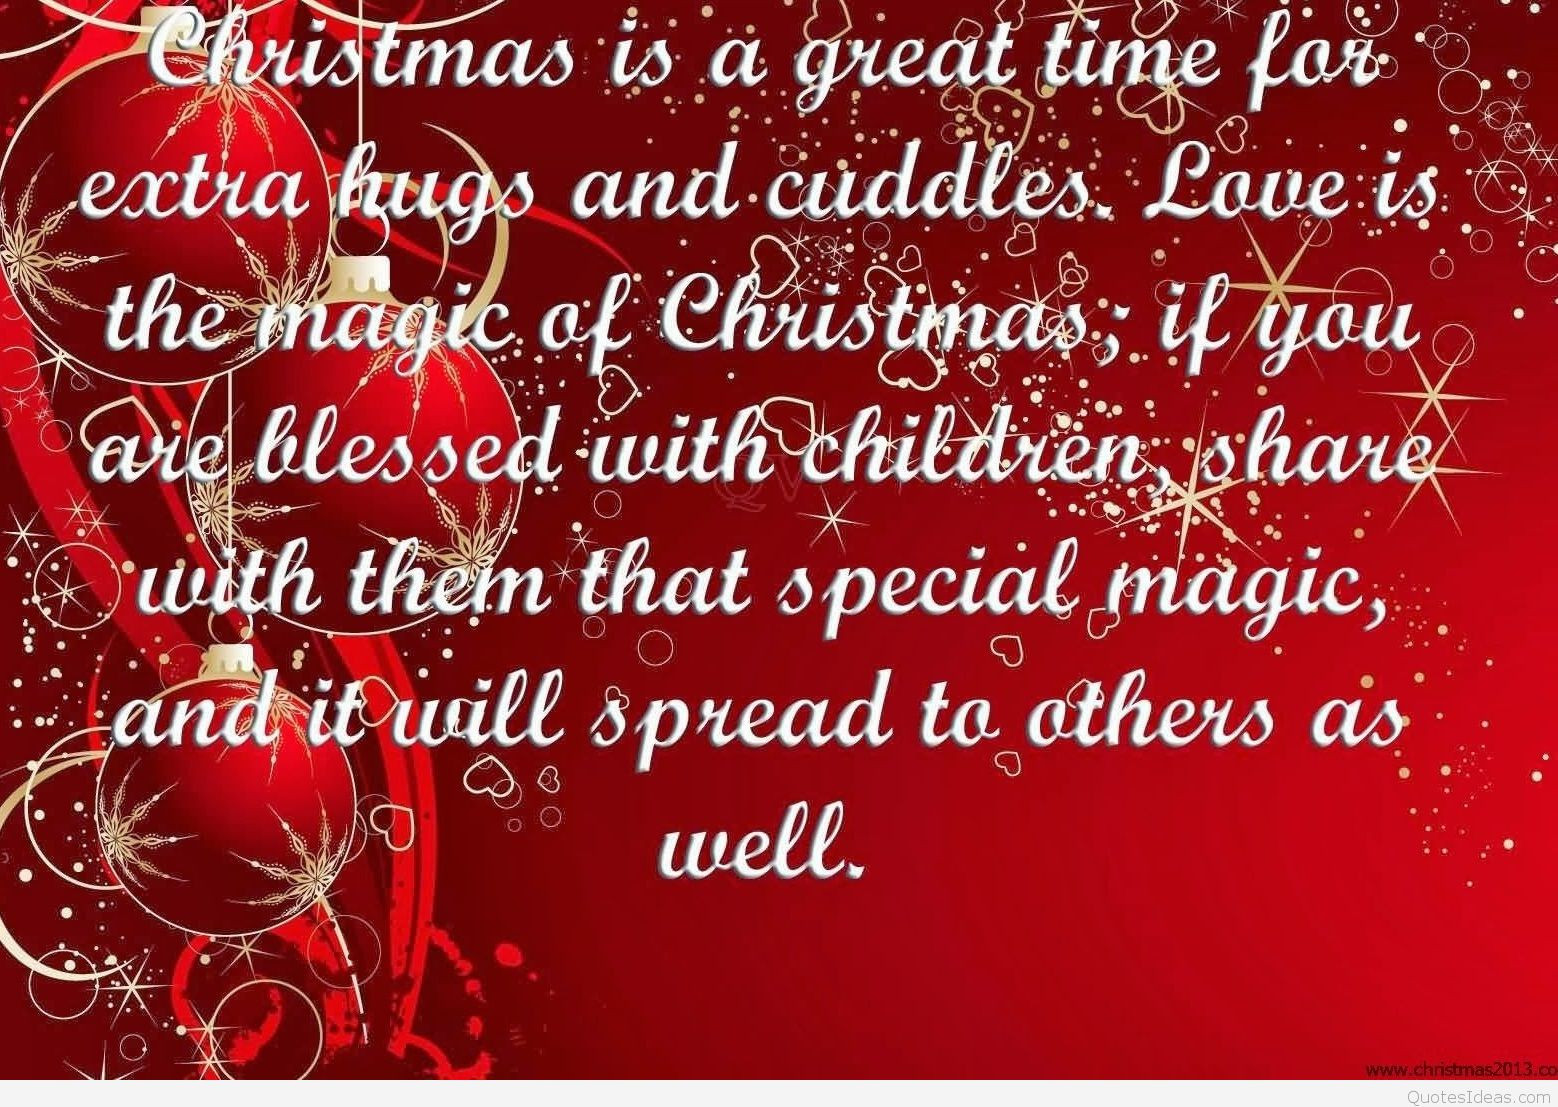 Merry Christmas Quotes And Images
 Merry Christmas Blessings Quotes Wallpapers & Cards 2015